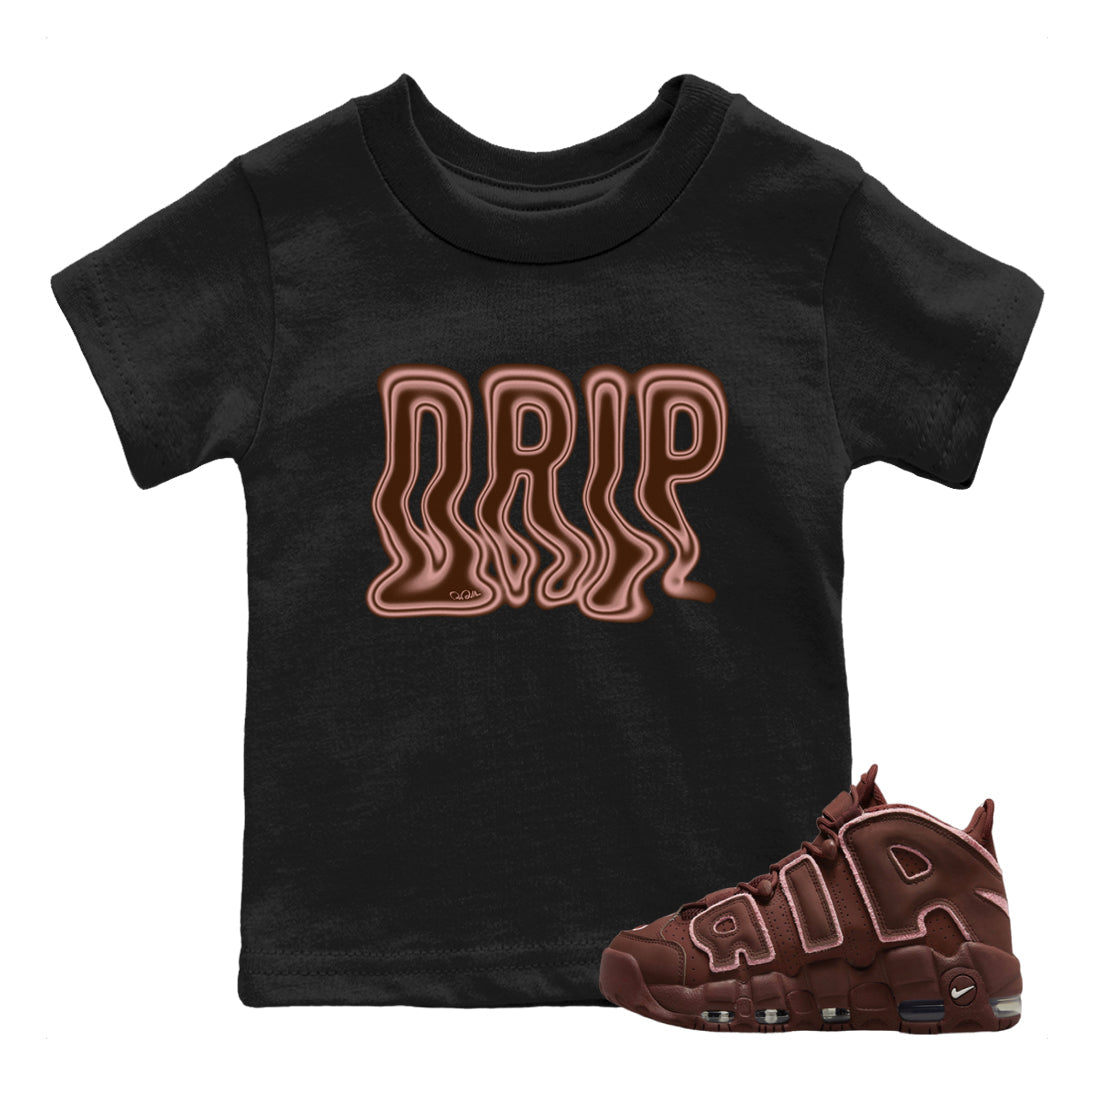 Air More Uptempo Valentines Day Sneaker Tees Drip Gear Zone Drip Sneaker Tees Nike Uptempo Valentines Day Shirt Kids Shirts Black 1